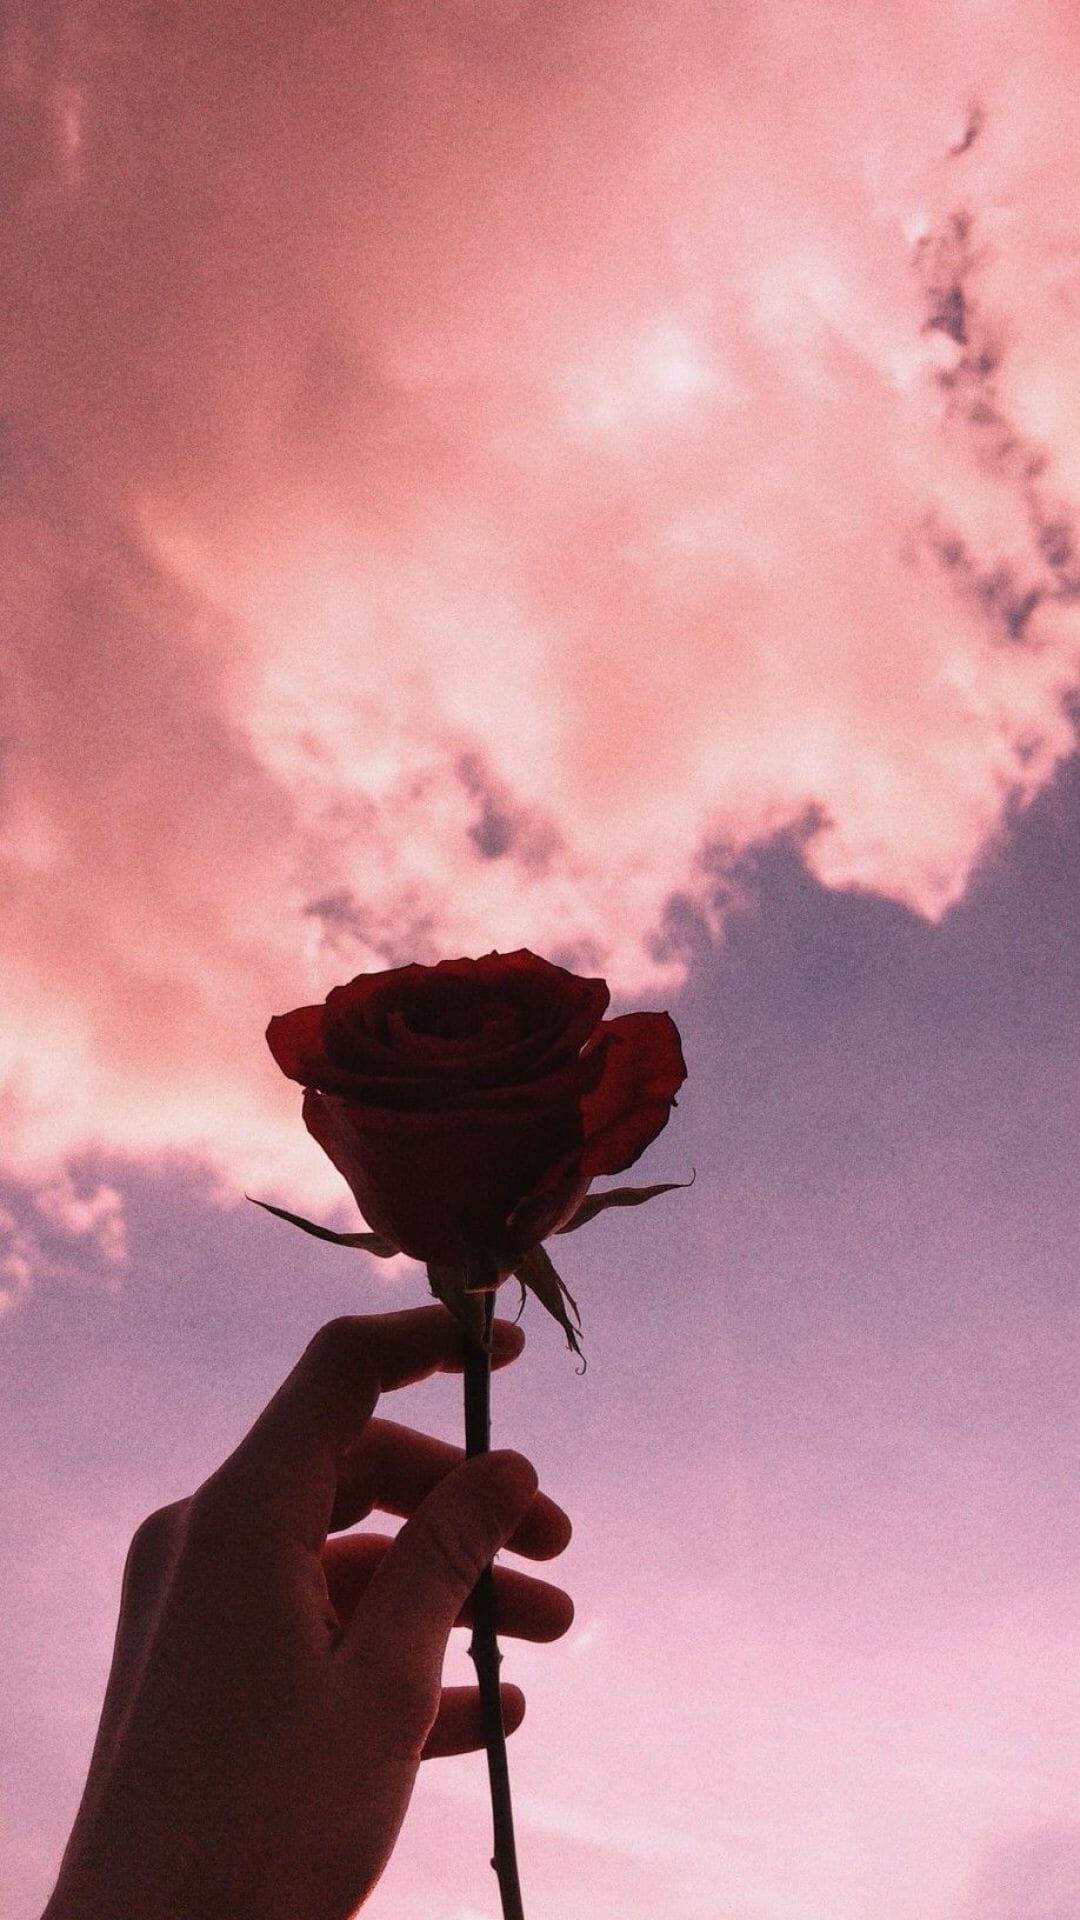 Aesthetic wallpaper of a hand holding a red rose against a pink and blue sky - Photography, garden, shadow, roses, sky